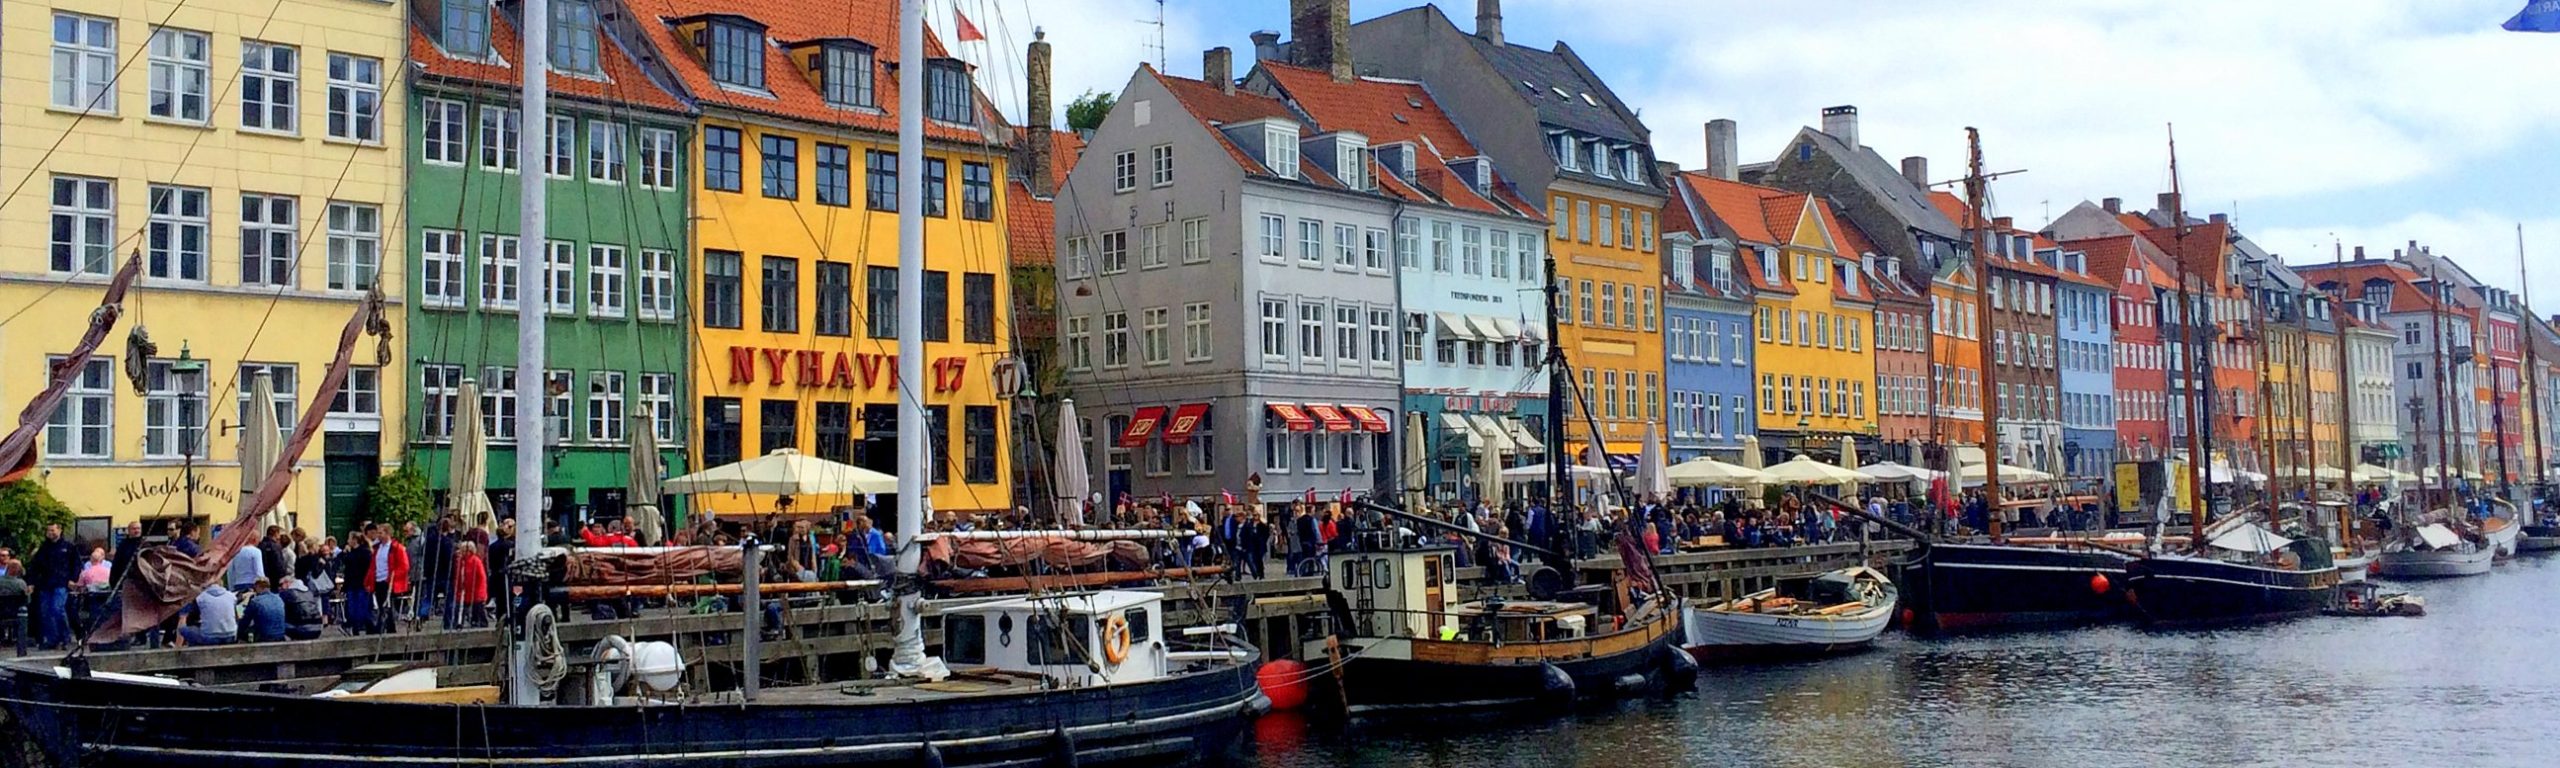 Pedal into Germany to beautiful Hamburg on this guided bike tour starting in Copenhagen.